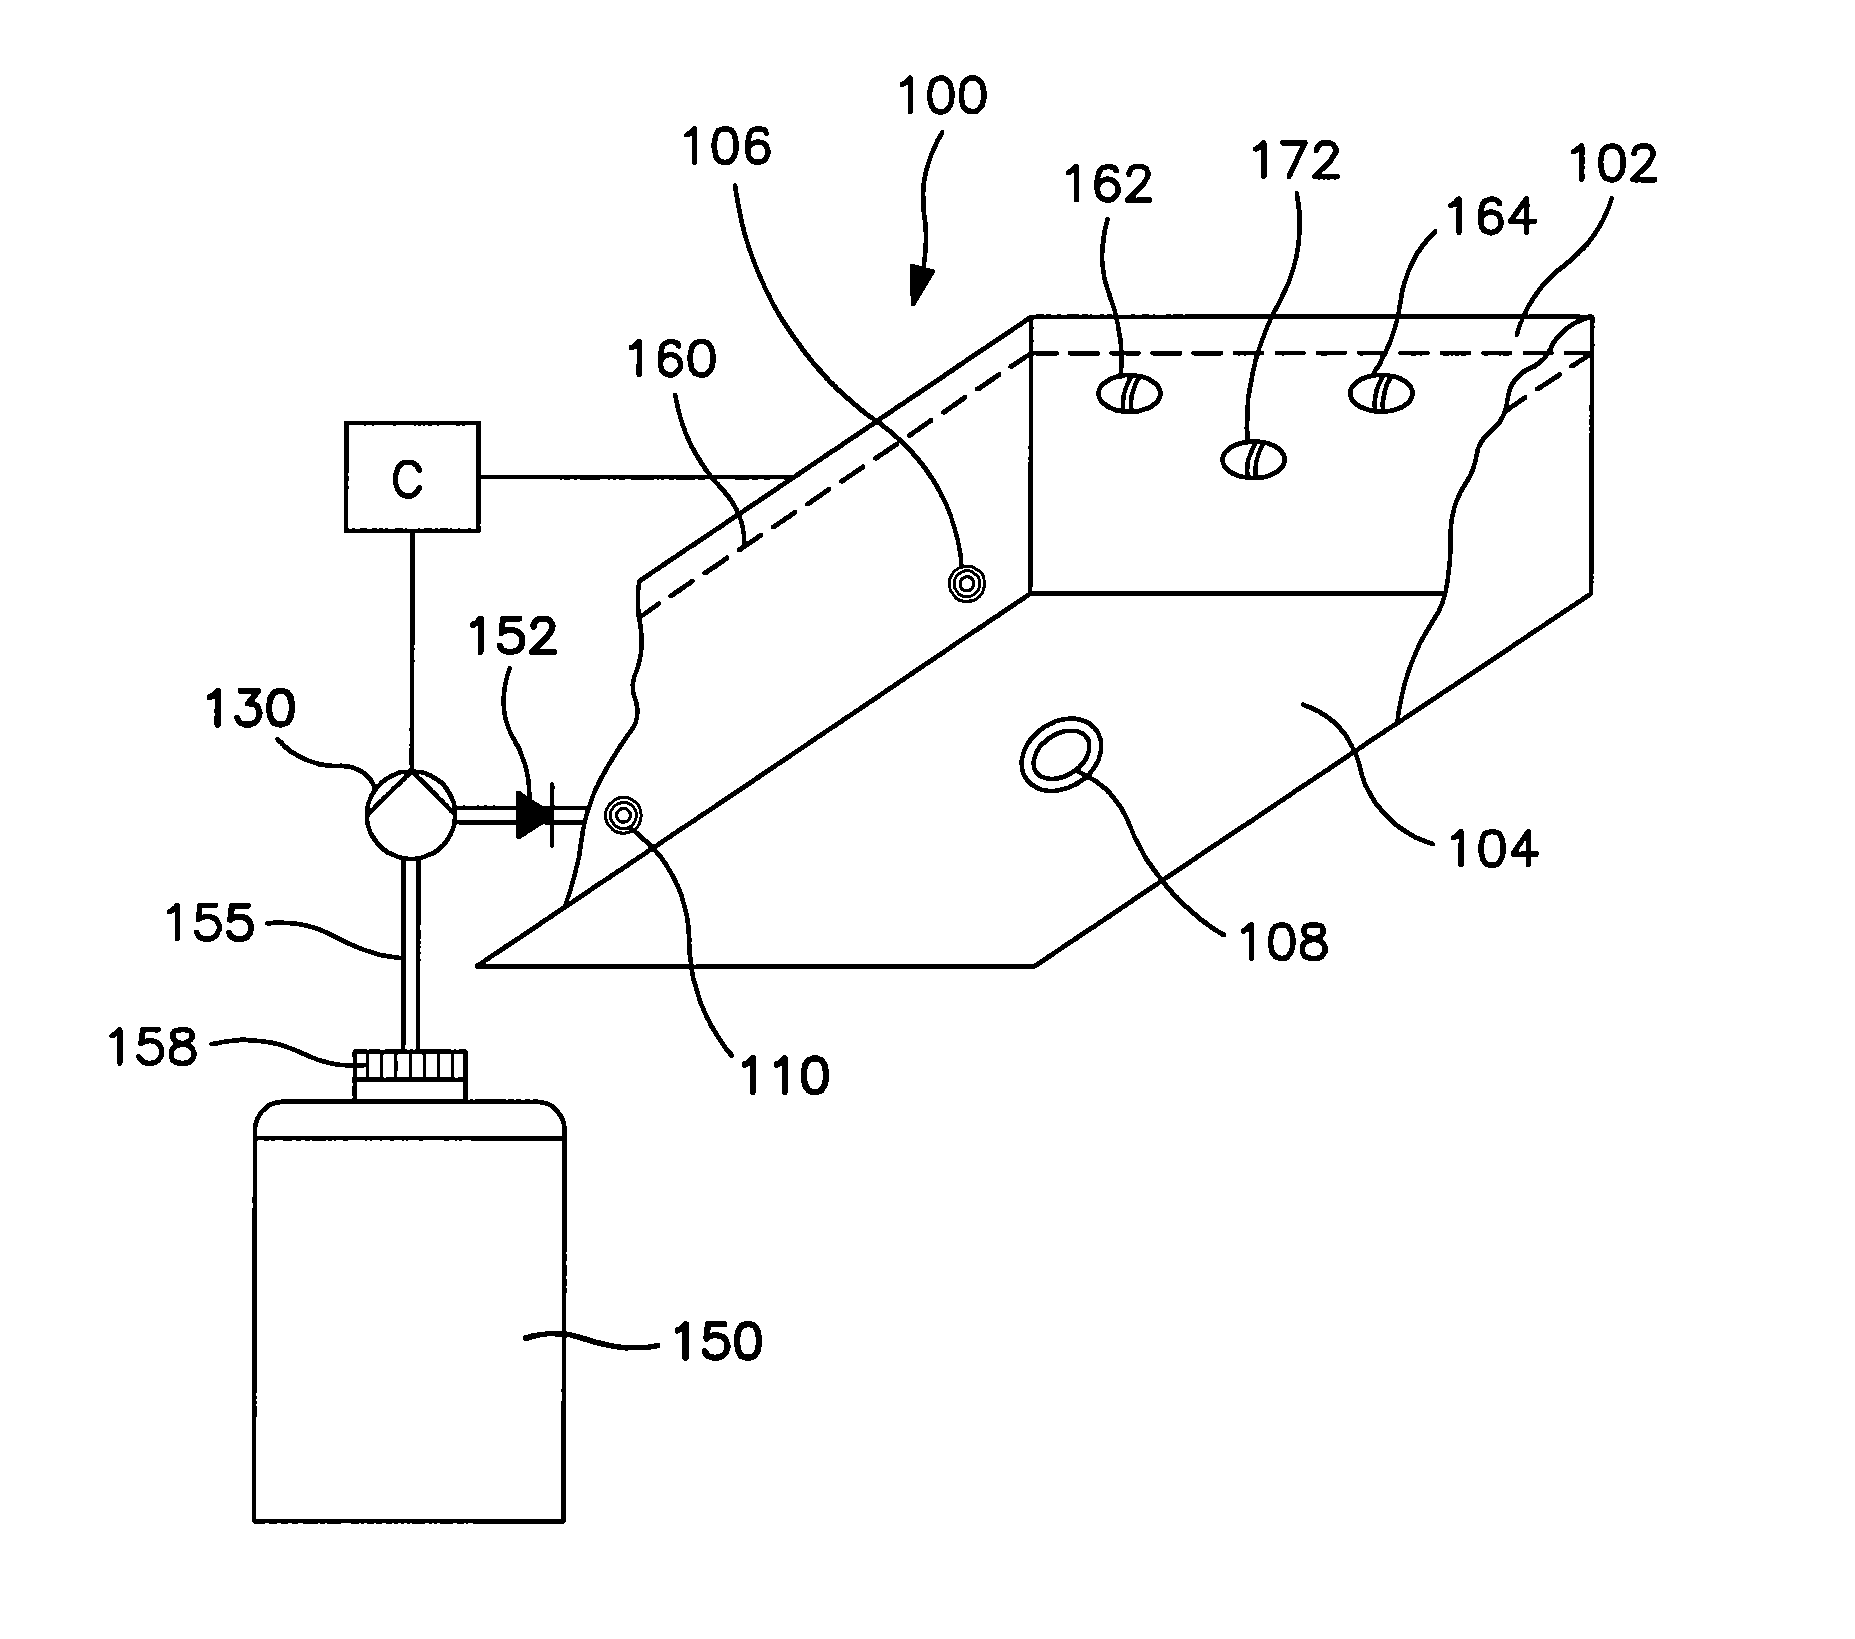 Automatic cooking medium level control systems and methods